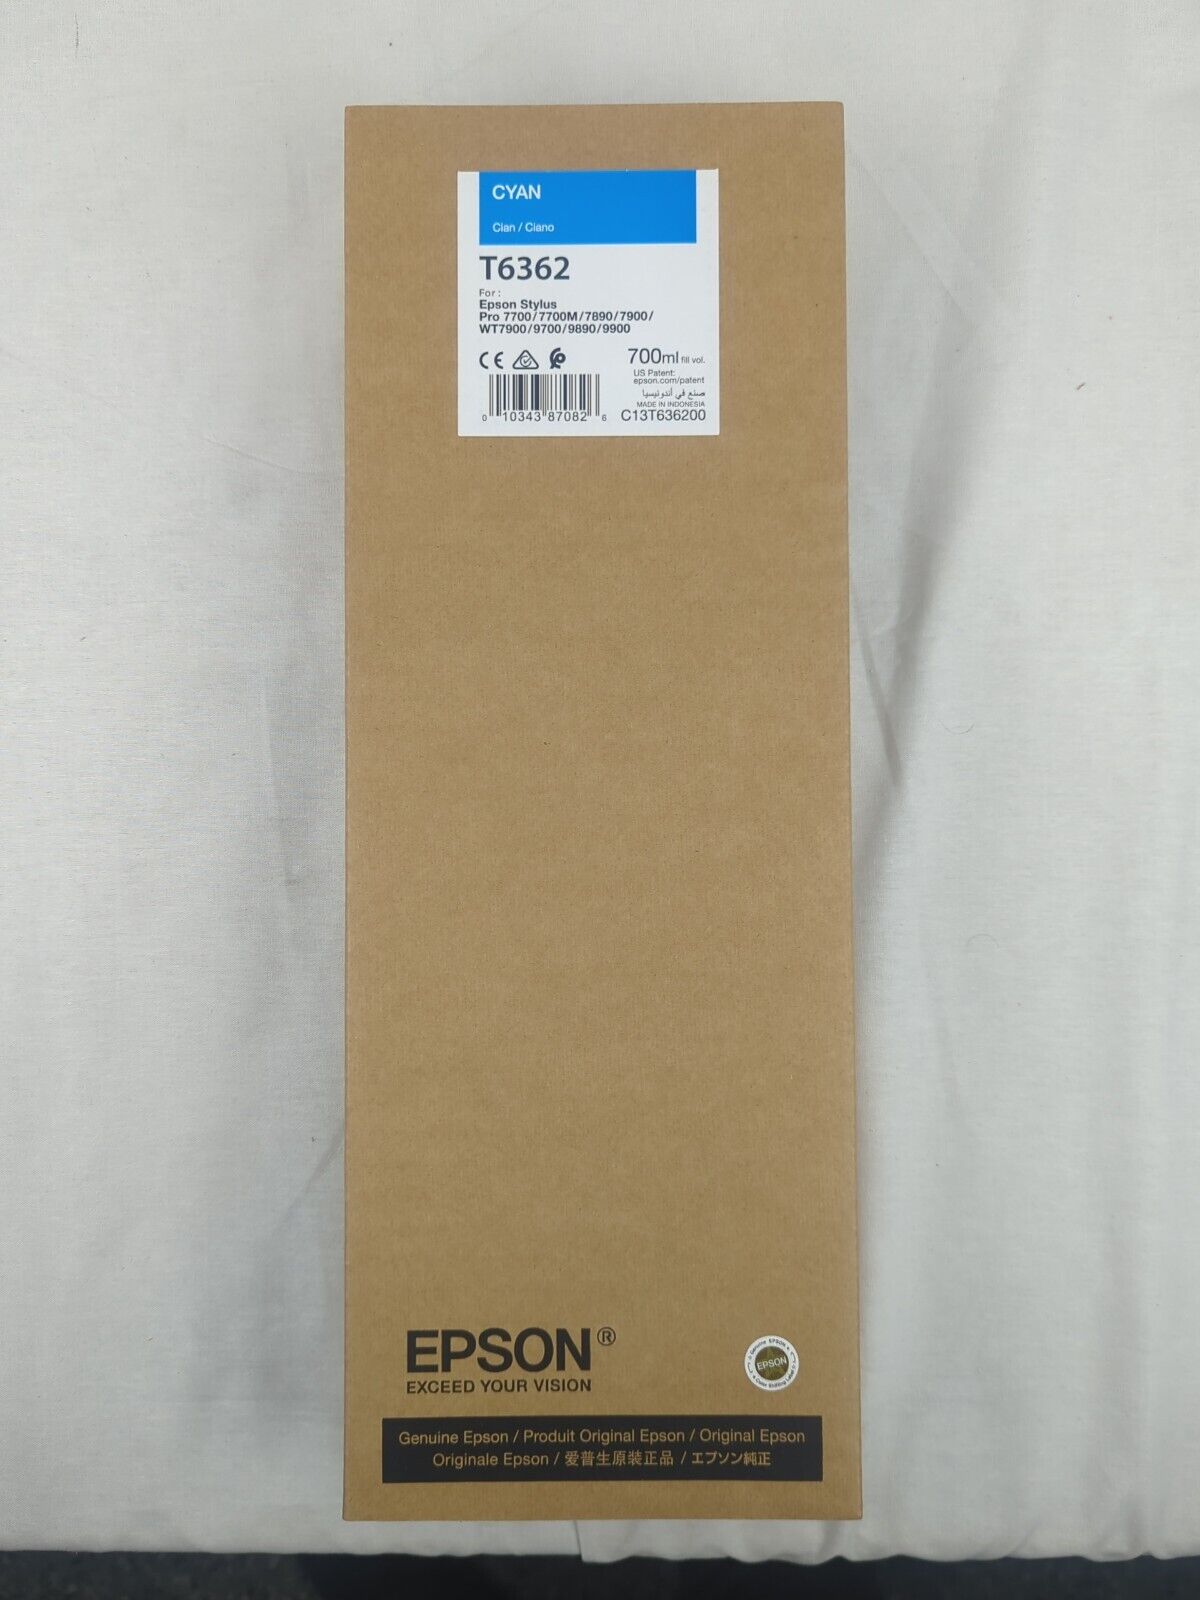 11/2022 New EPSON T6362 Cyan Ink 700ml for Stylus Pro 7890/7900/9890/9900